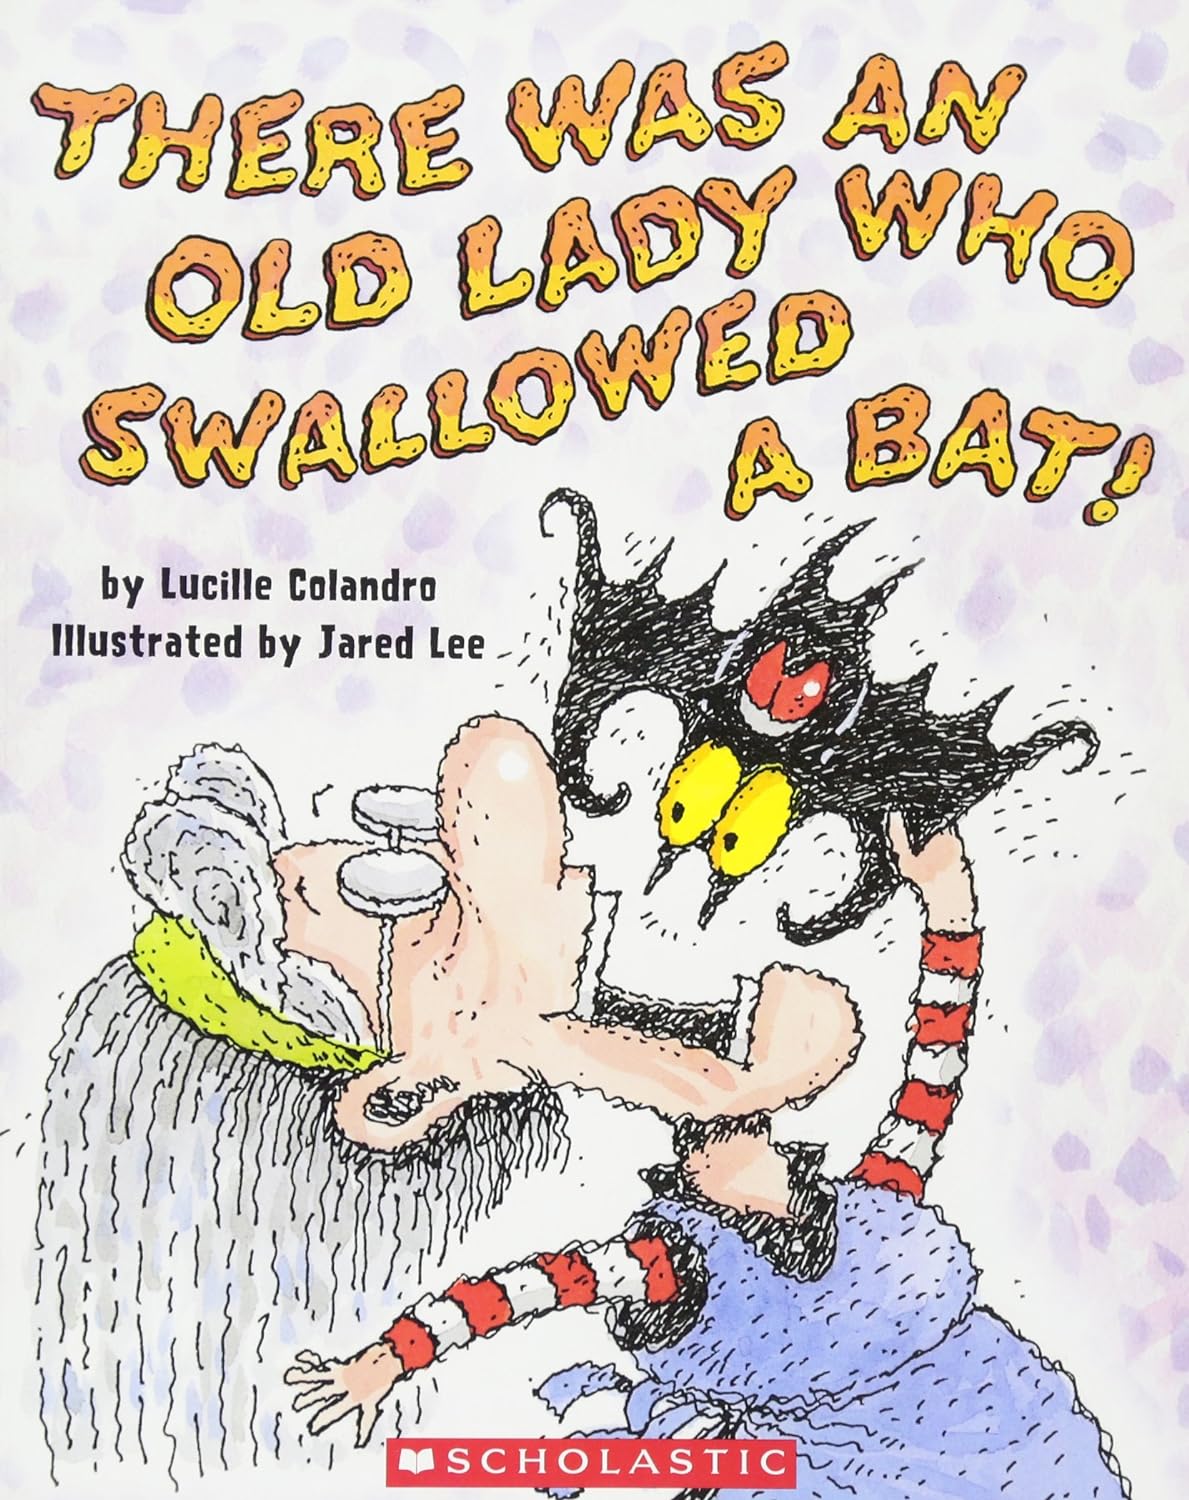 the old lady who swallowed a bat book